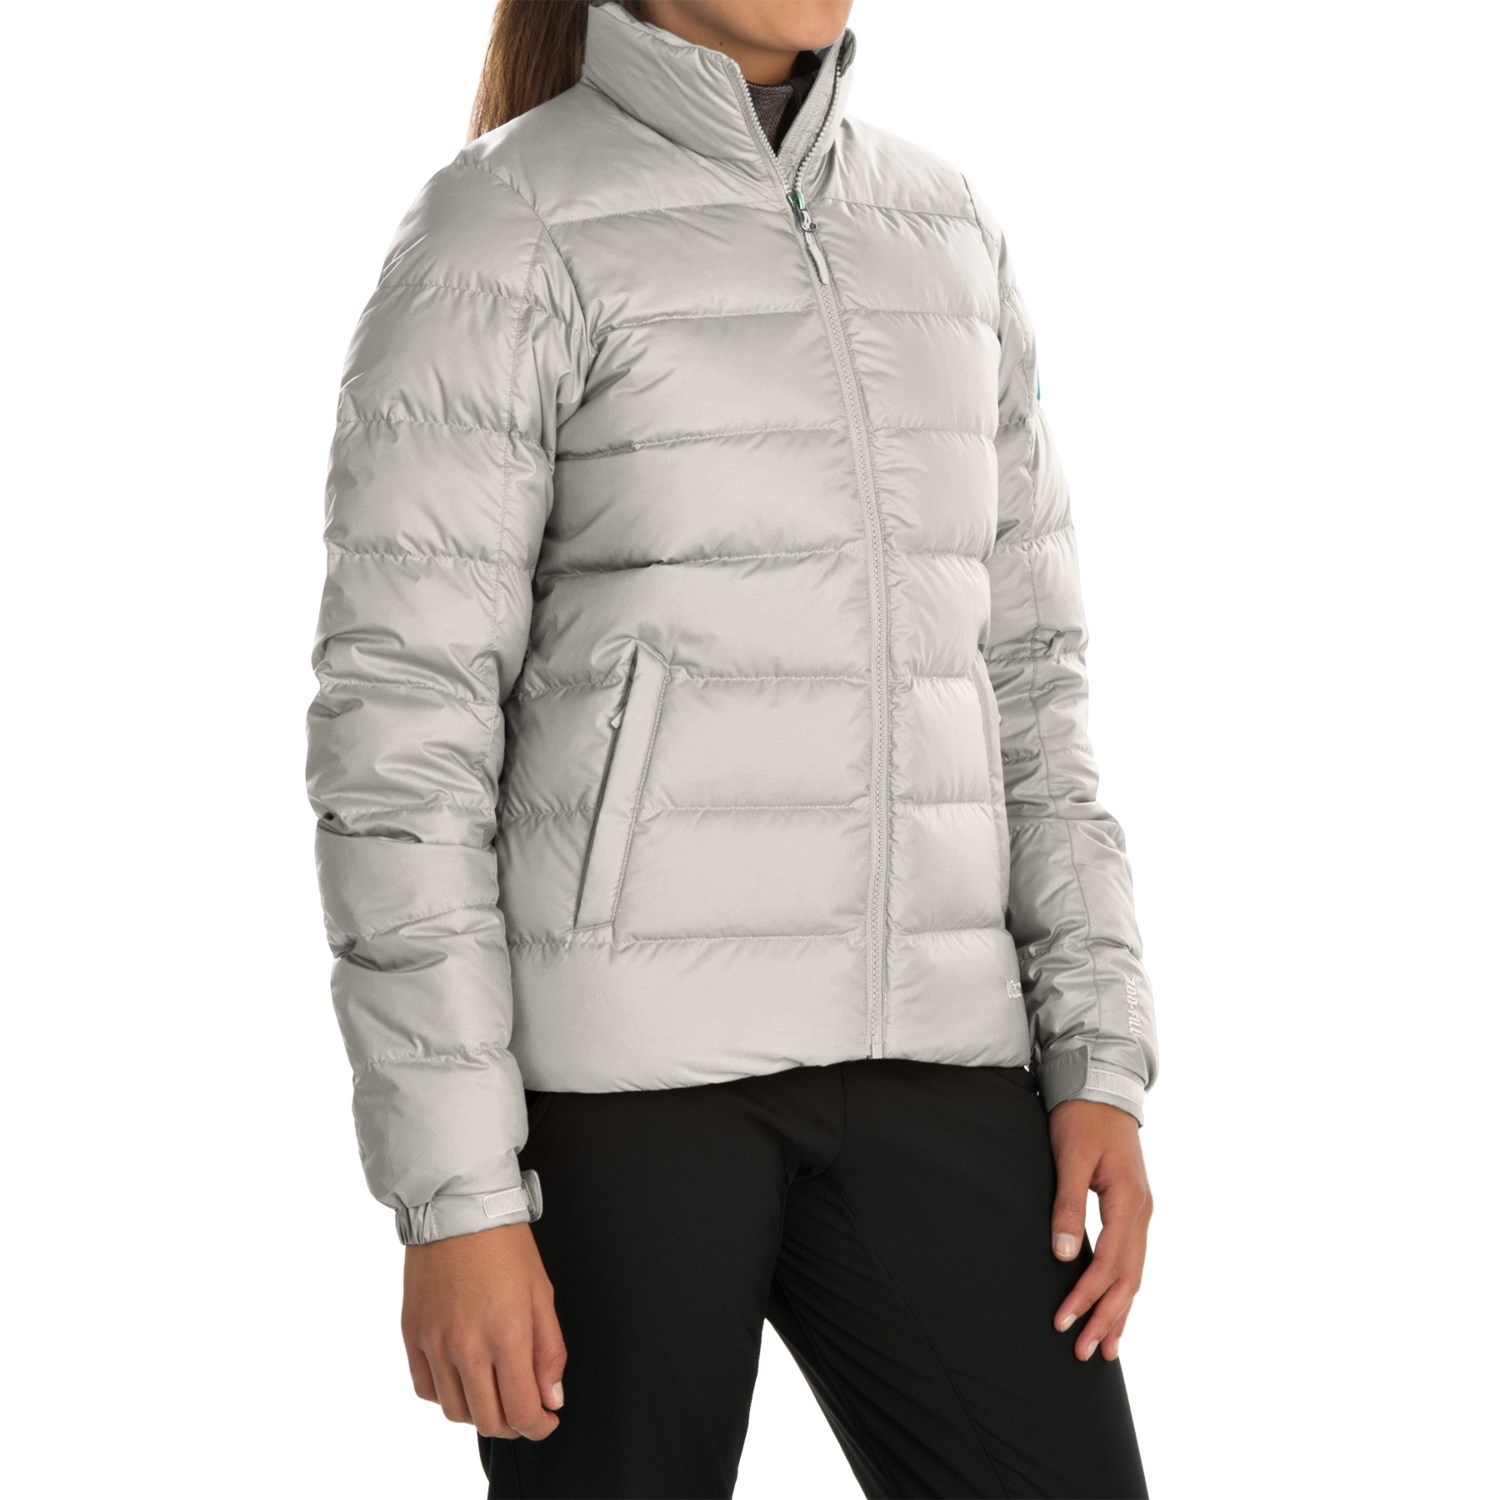 Marmot Guides Down Jacket (For Women)